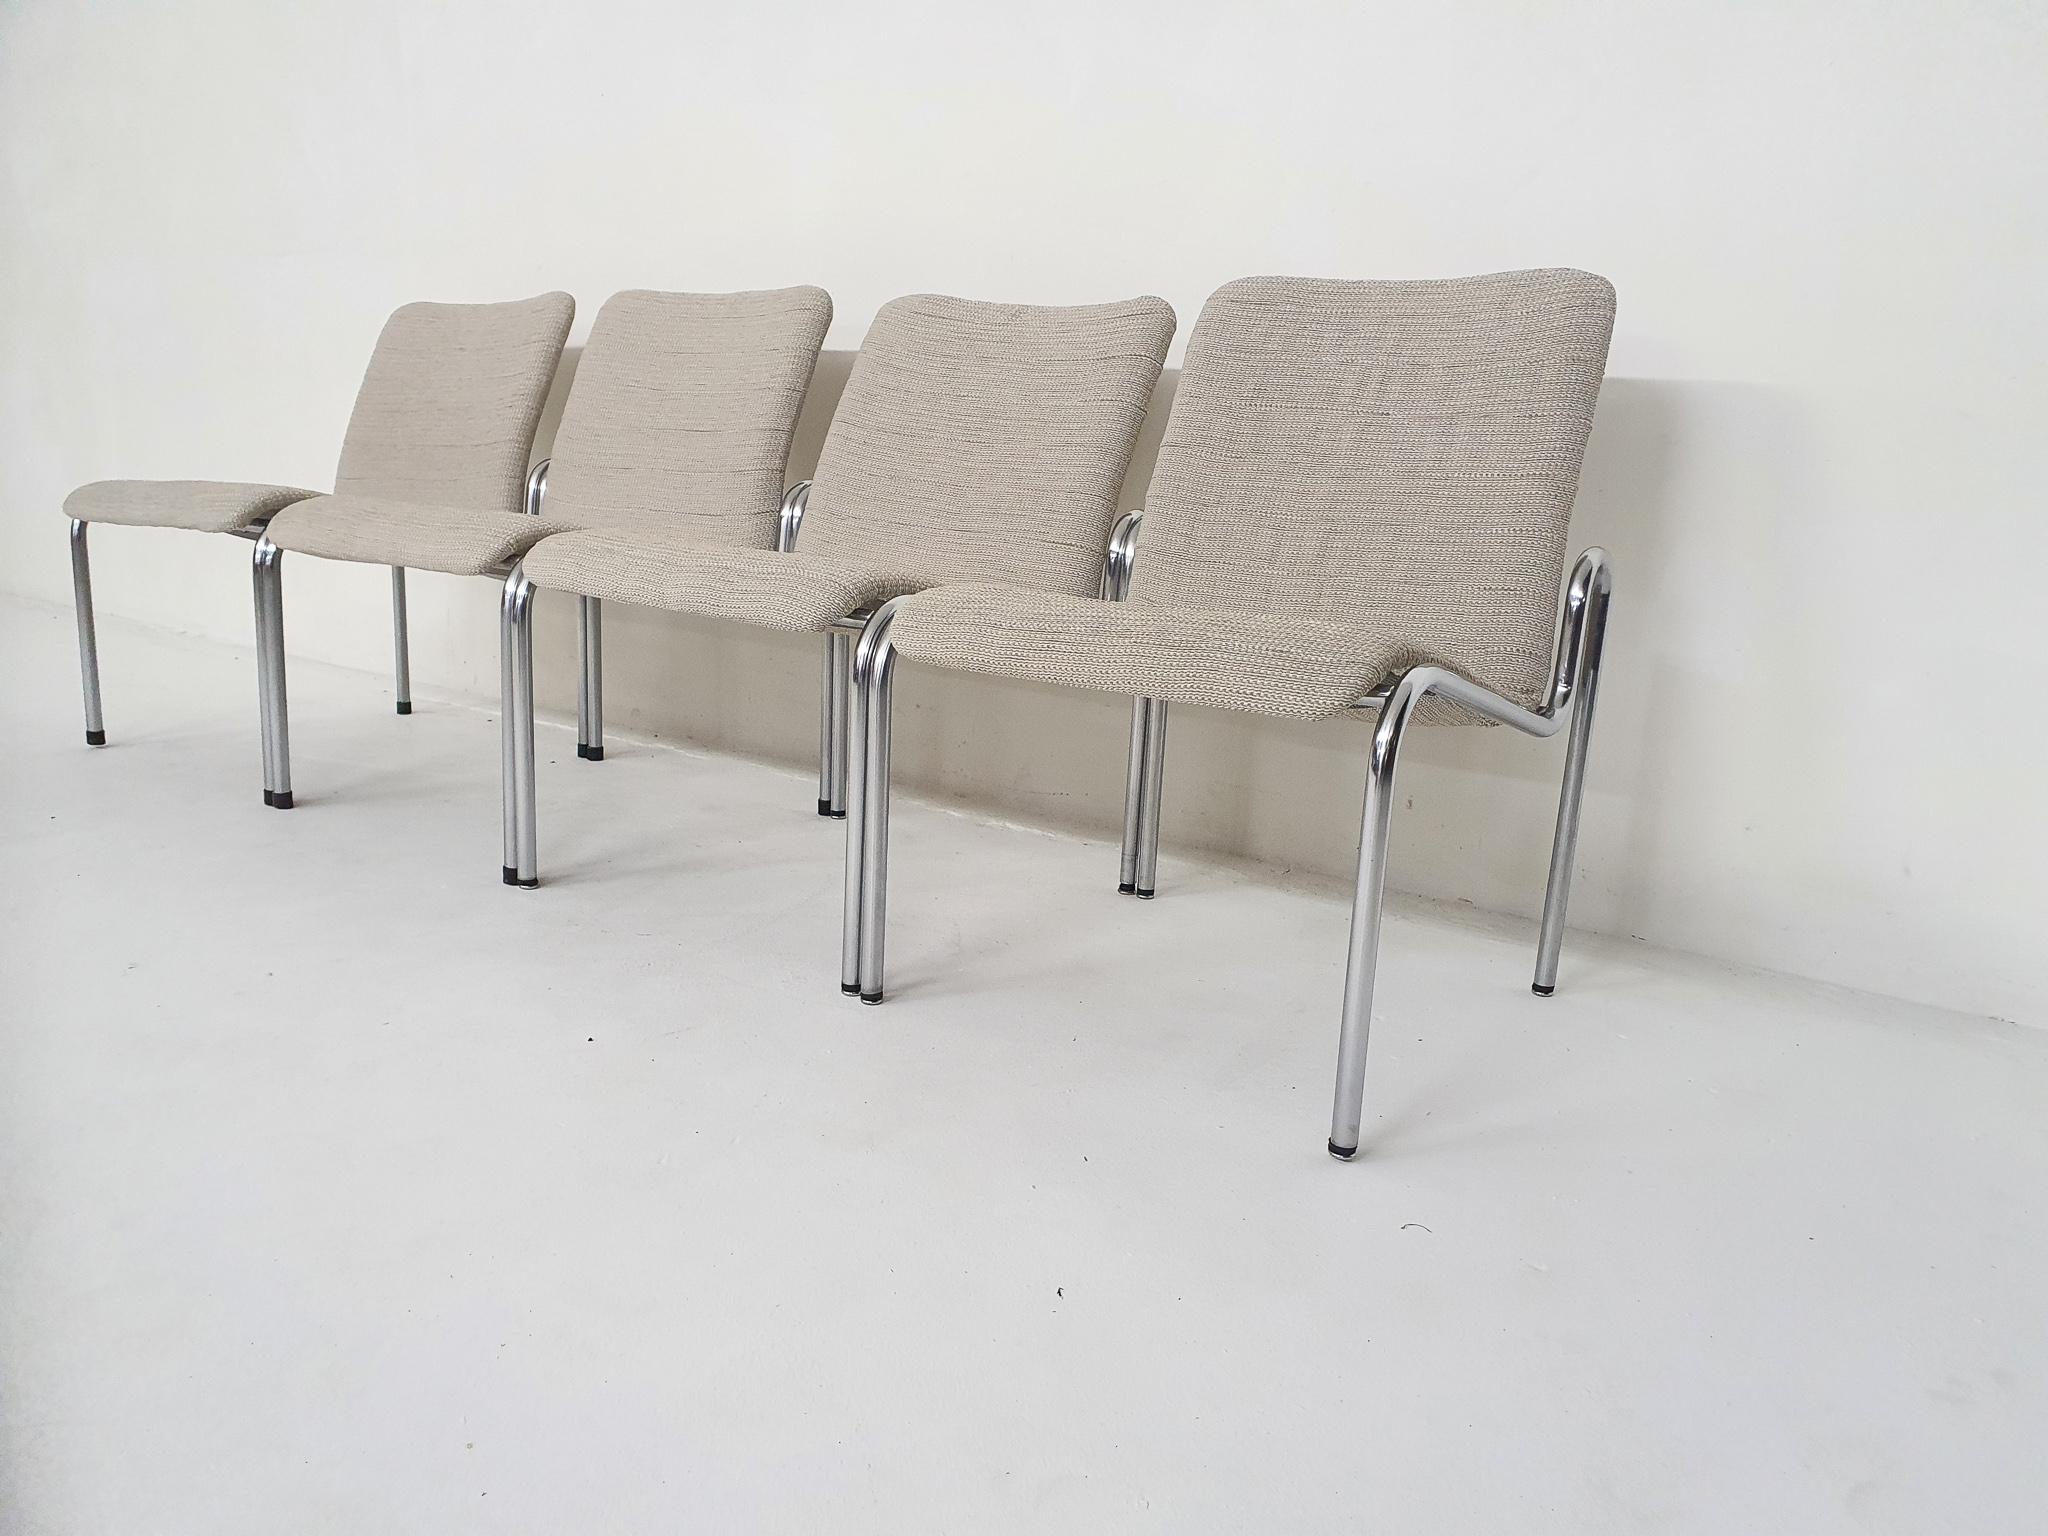 Kho Liang Ie for Stabin lounge chairs model 703, Holland 1960’s

Tubular metal frame and new off white upholstery.
Two chairs have different rubber floor protectors. Marked at the bottom.

Kho Liang Le
Kho Liang Ie (1927-1975) was a Dutch industrial